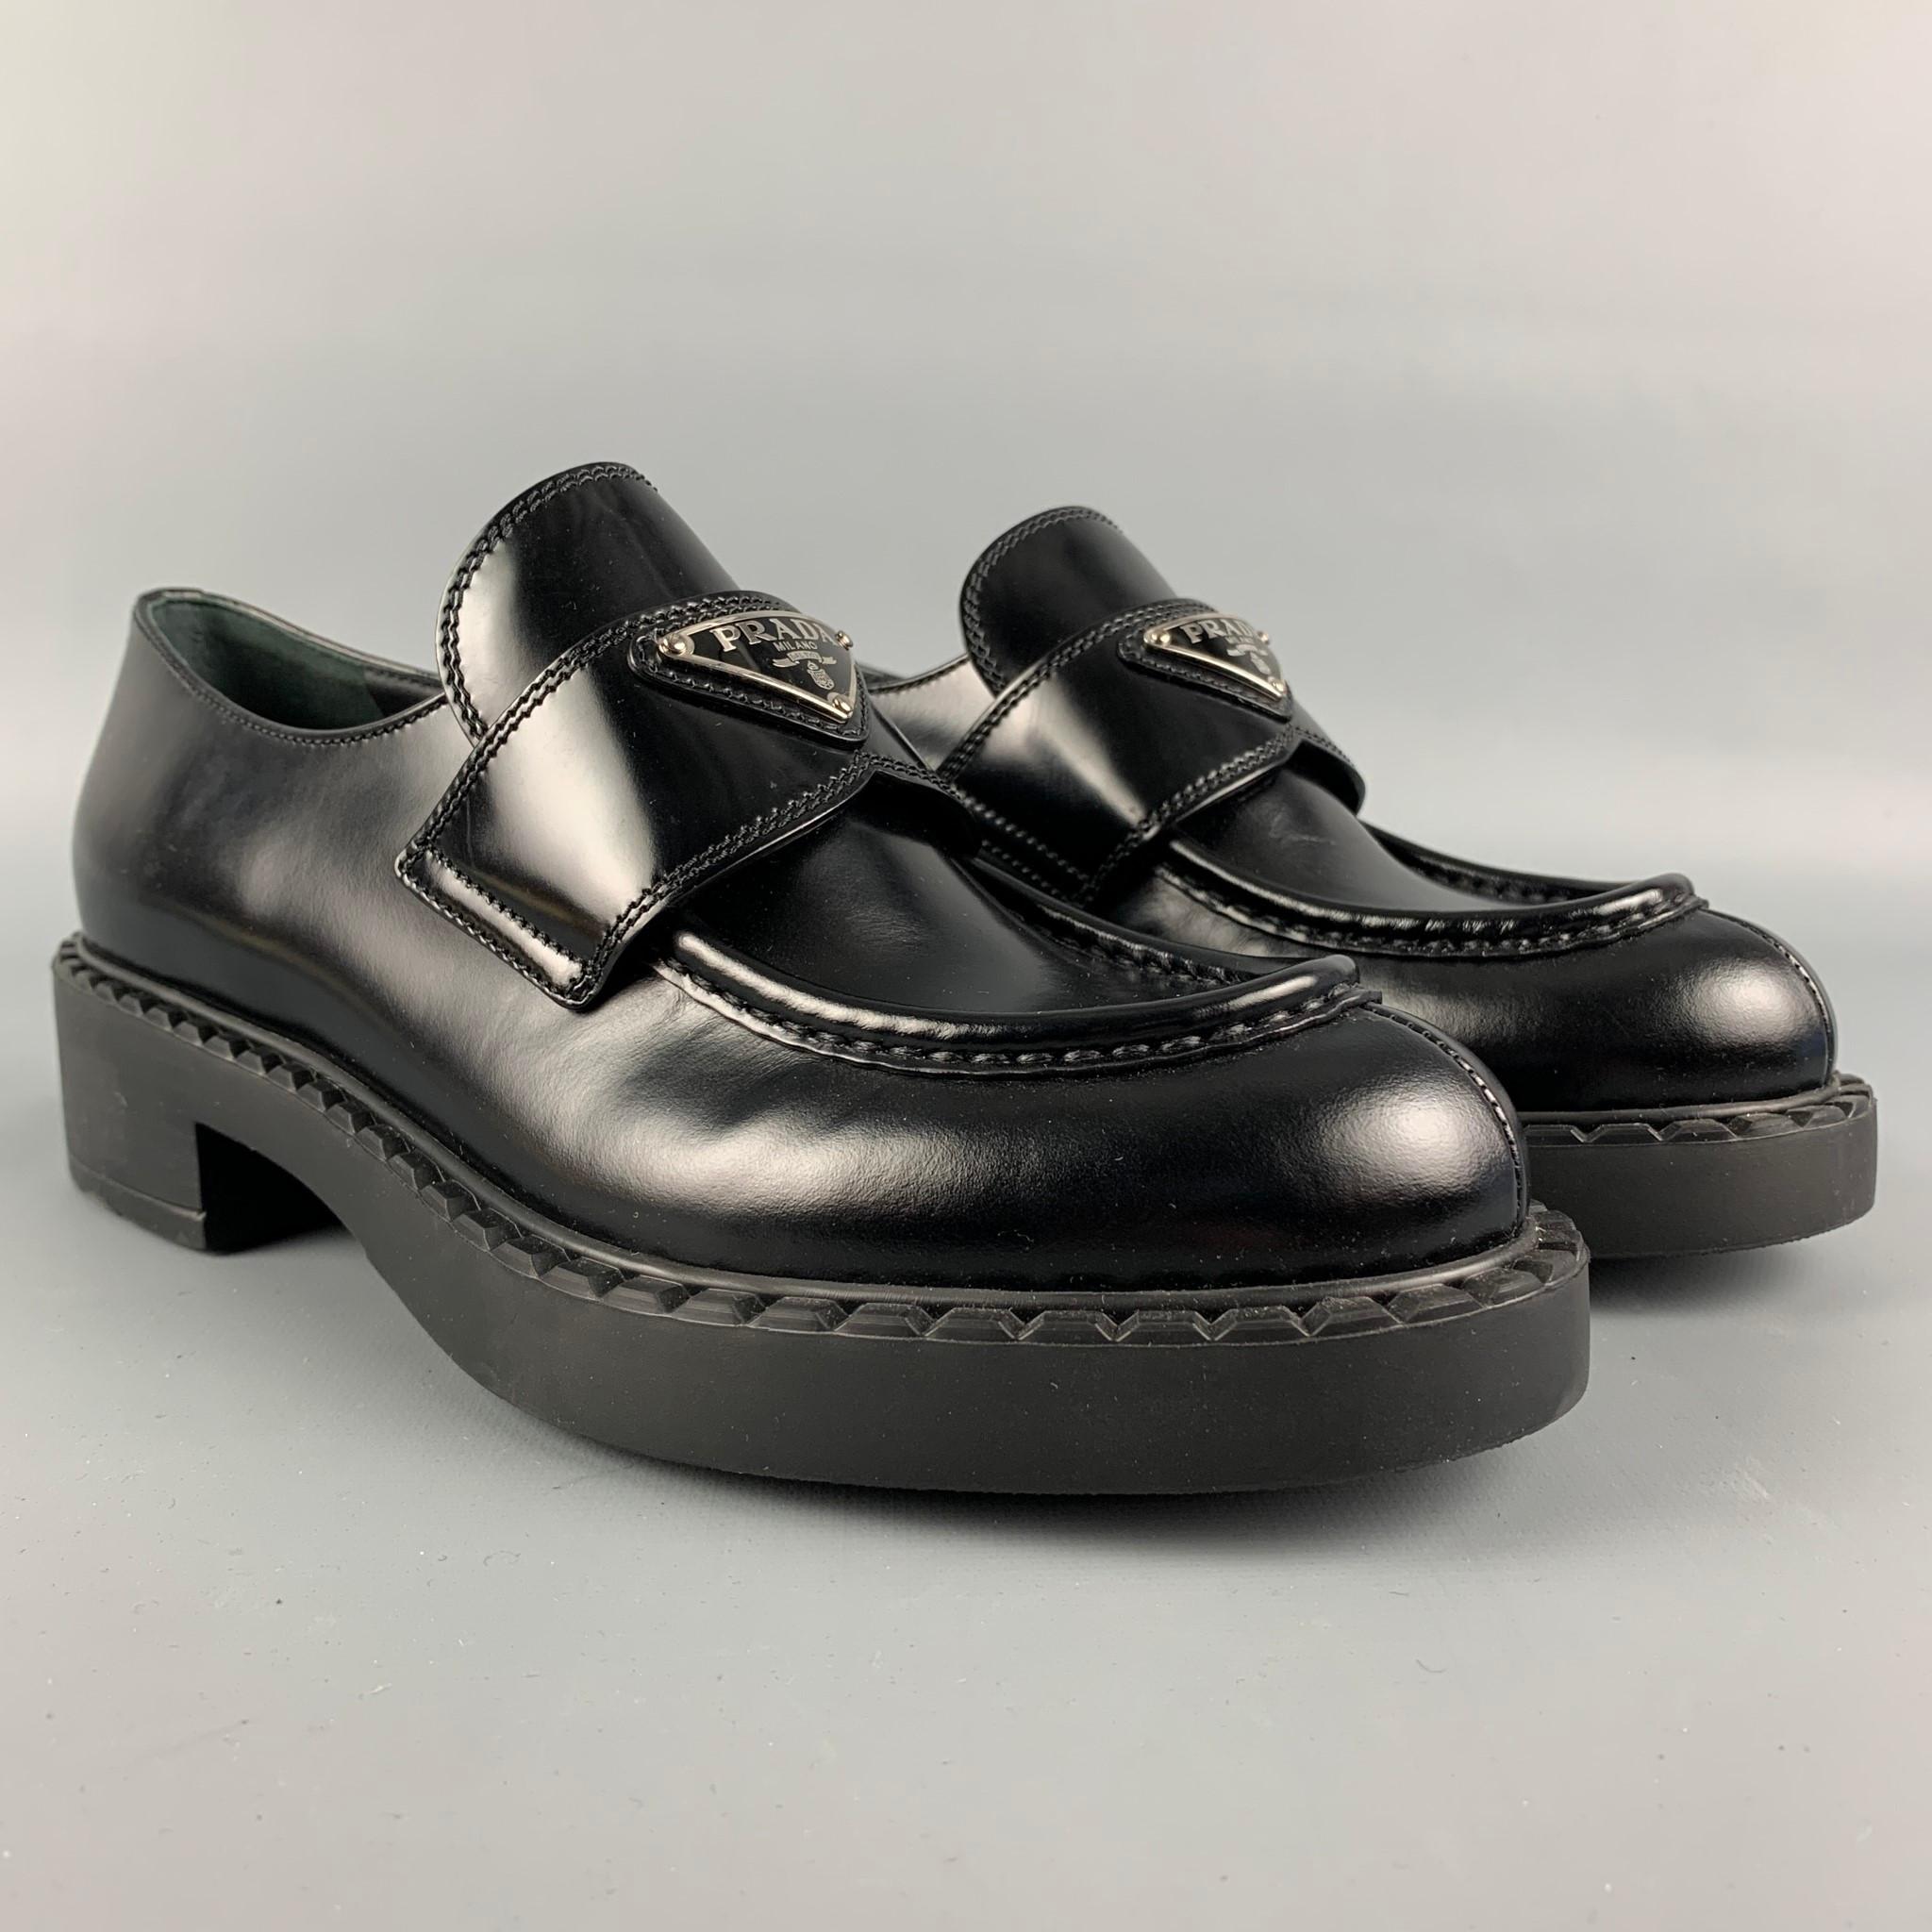 PRADA loafers comes in a black leather featuring a round moc toe, slip on, triangle logo, rubber sole, and a chunky heel. Made in Italy.

Brand New.
Marked: 37.5
Original Retail Price: $975.00

Measurements:

Heel: 2 in.
Platform: 0.5 in. 